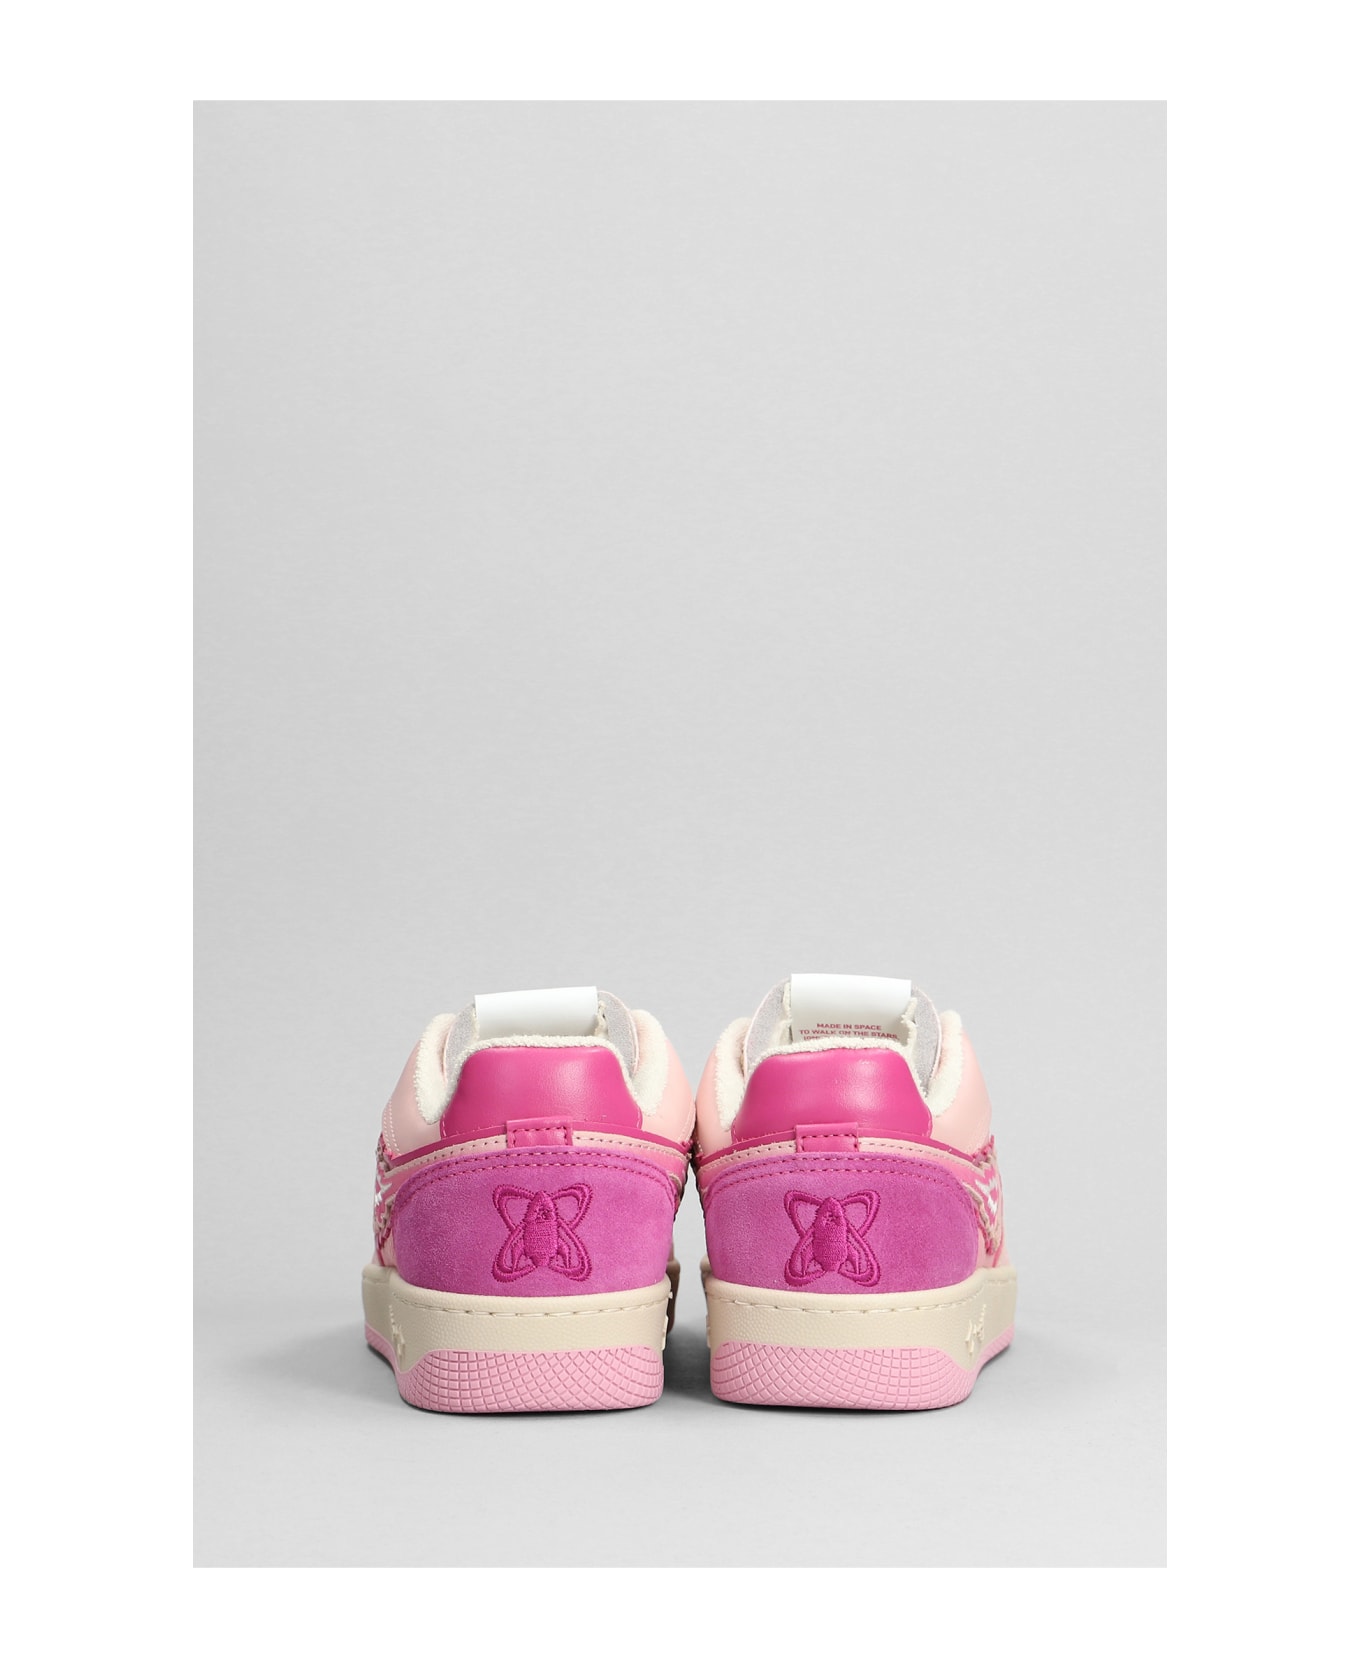 Enterprise Japan Sneakers In Rose-pink Suede And Leather - Pink